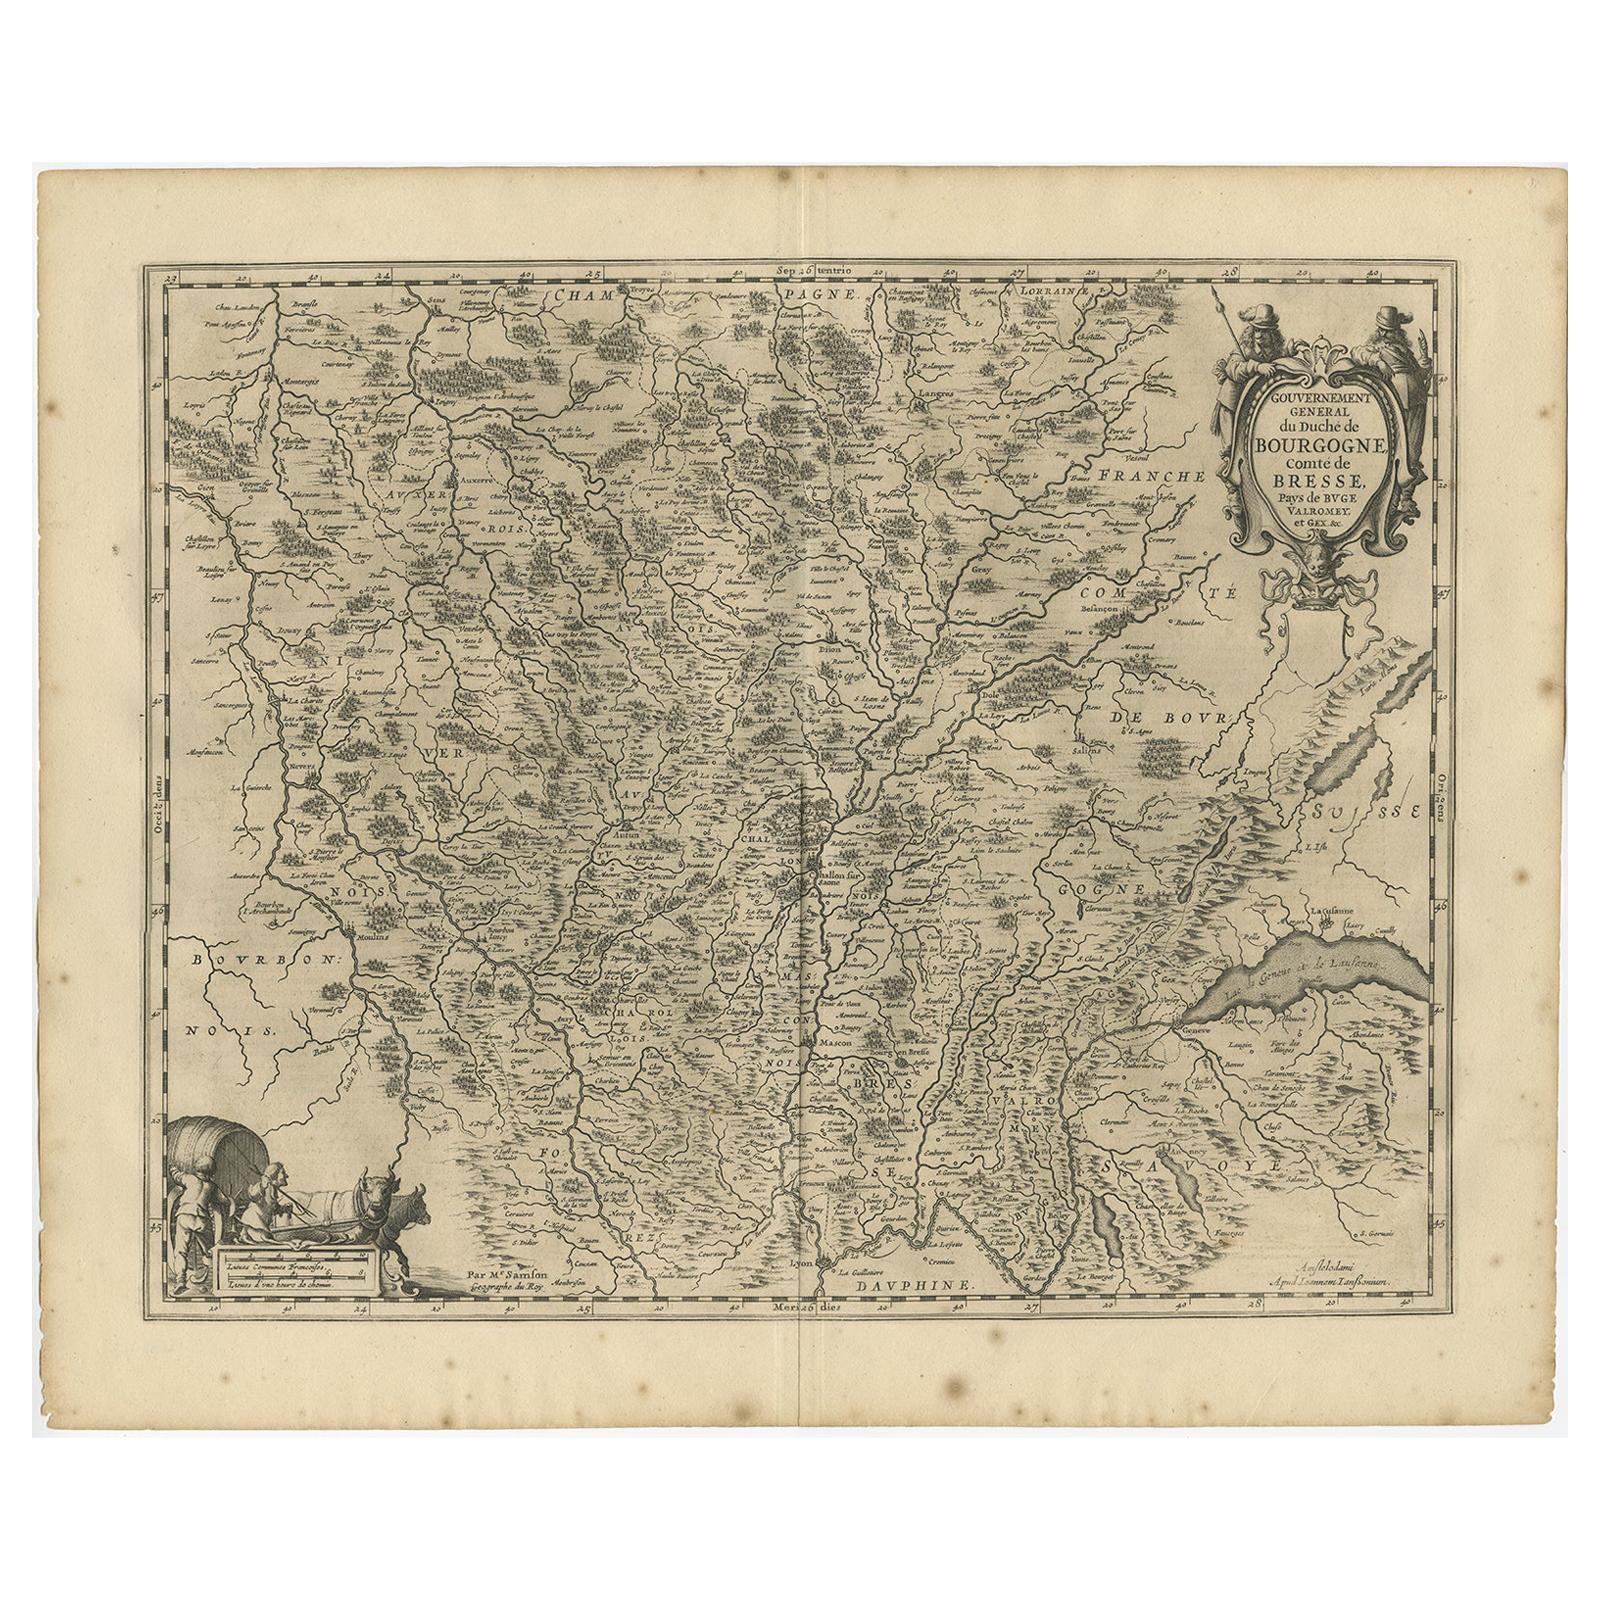 Antique Map of the Region of Burgundy by Janssonius '1657'